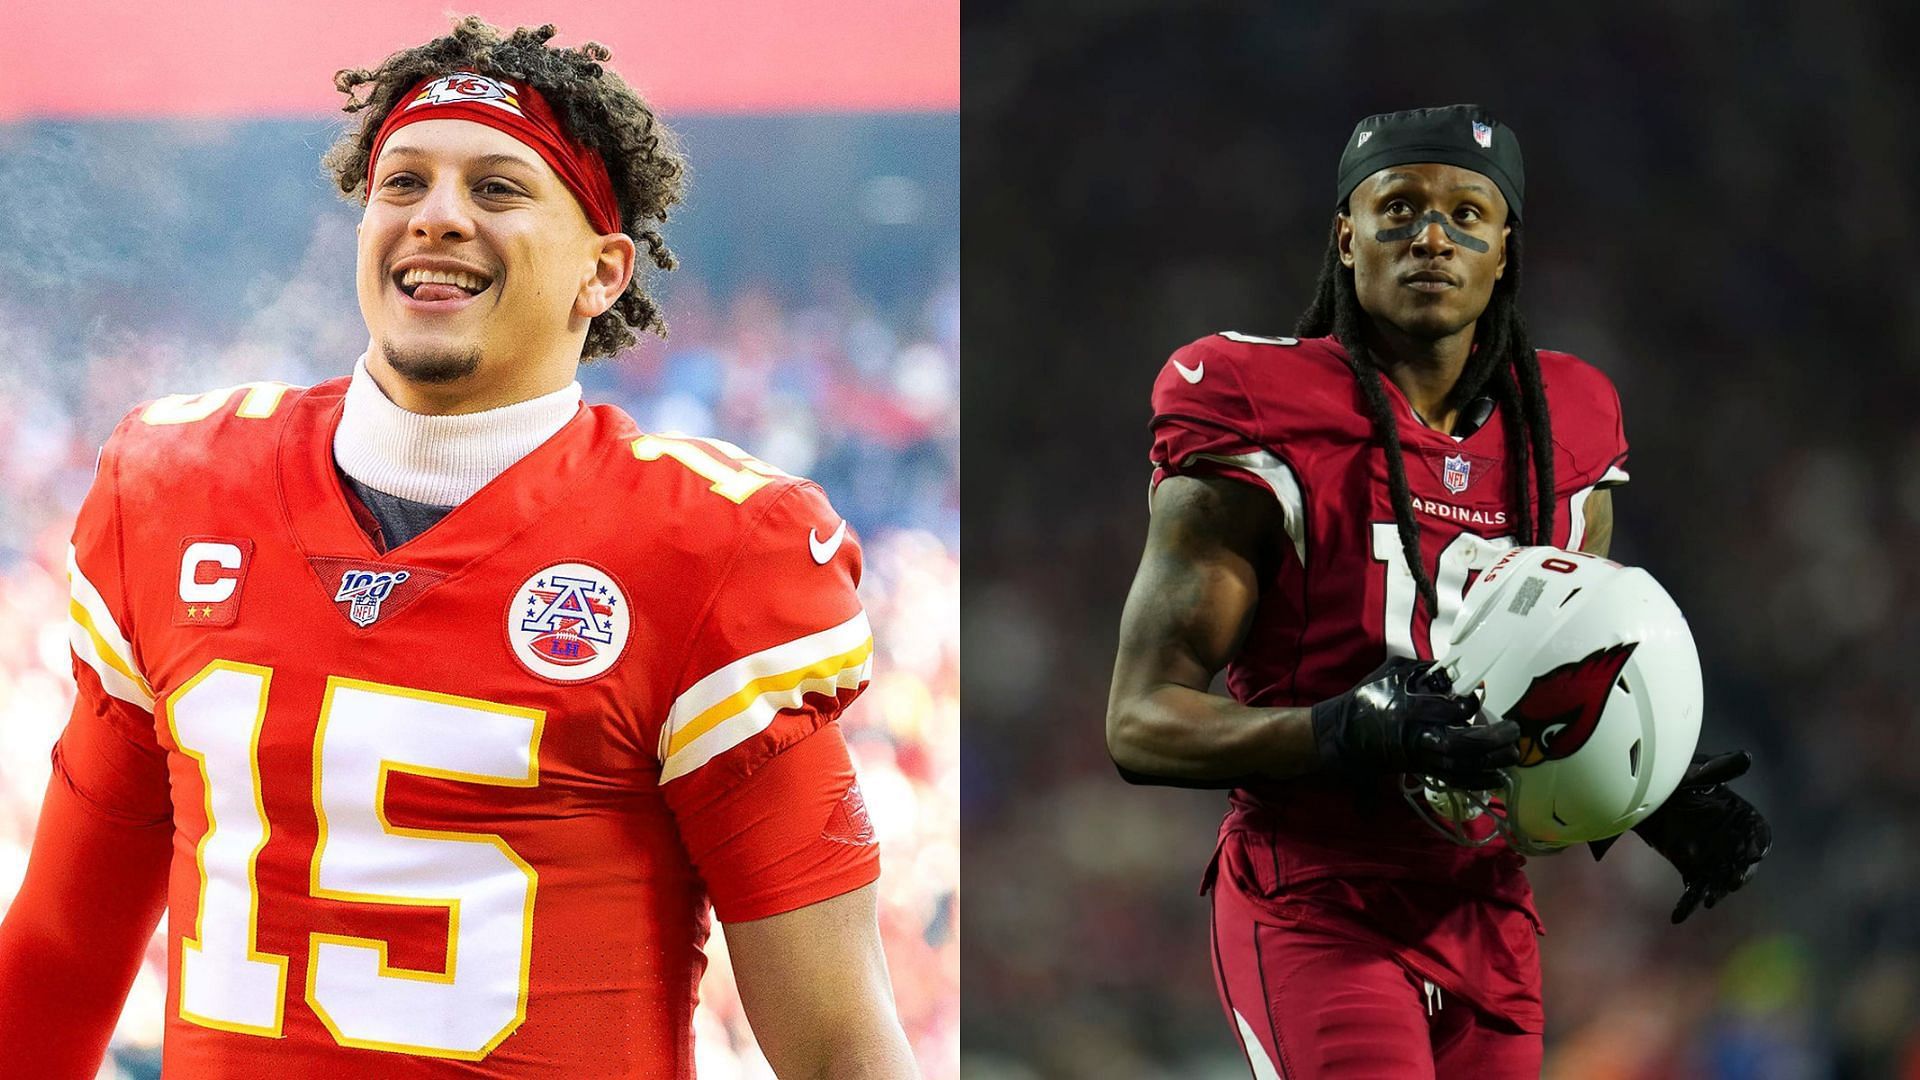 Could Chiefs QB Patrick Mahomes (l) have a new offensive target in WR DeAndre Hopkins (r)?